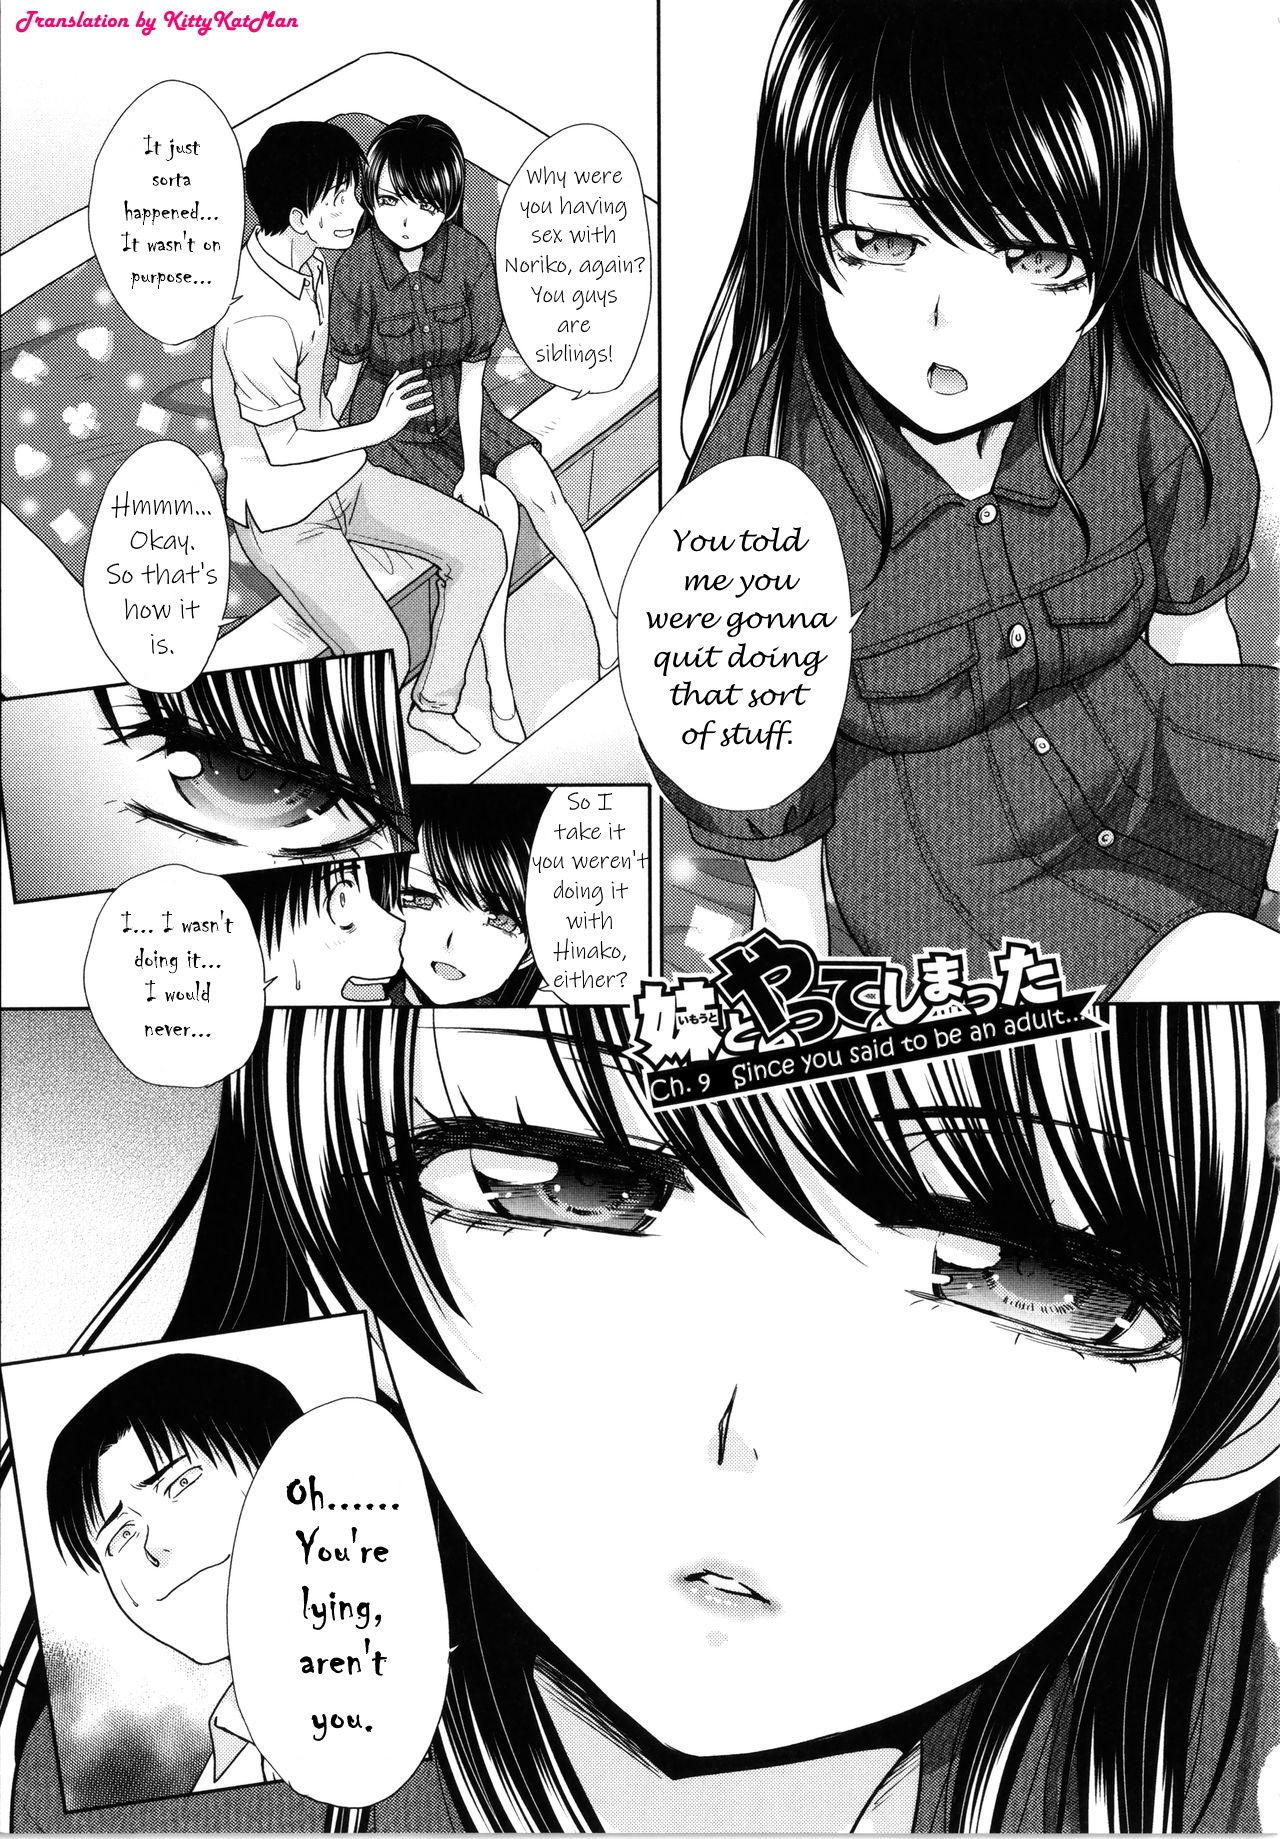 Imouto to Yatte Shimattashi, Imouto no Tomodachi to mo Yatte Shimatta | I had sex with my sister and then I had sex with her friends 146